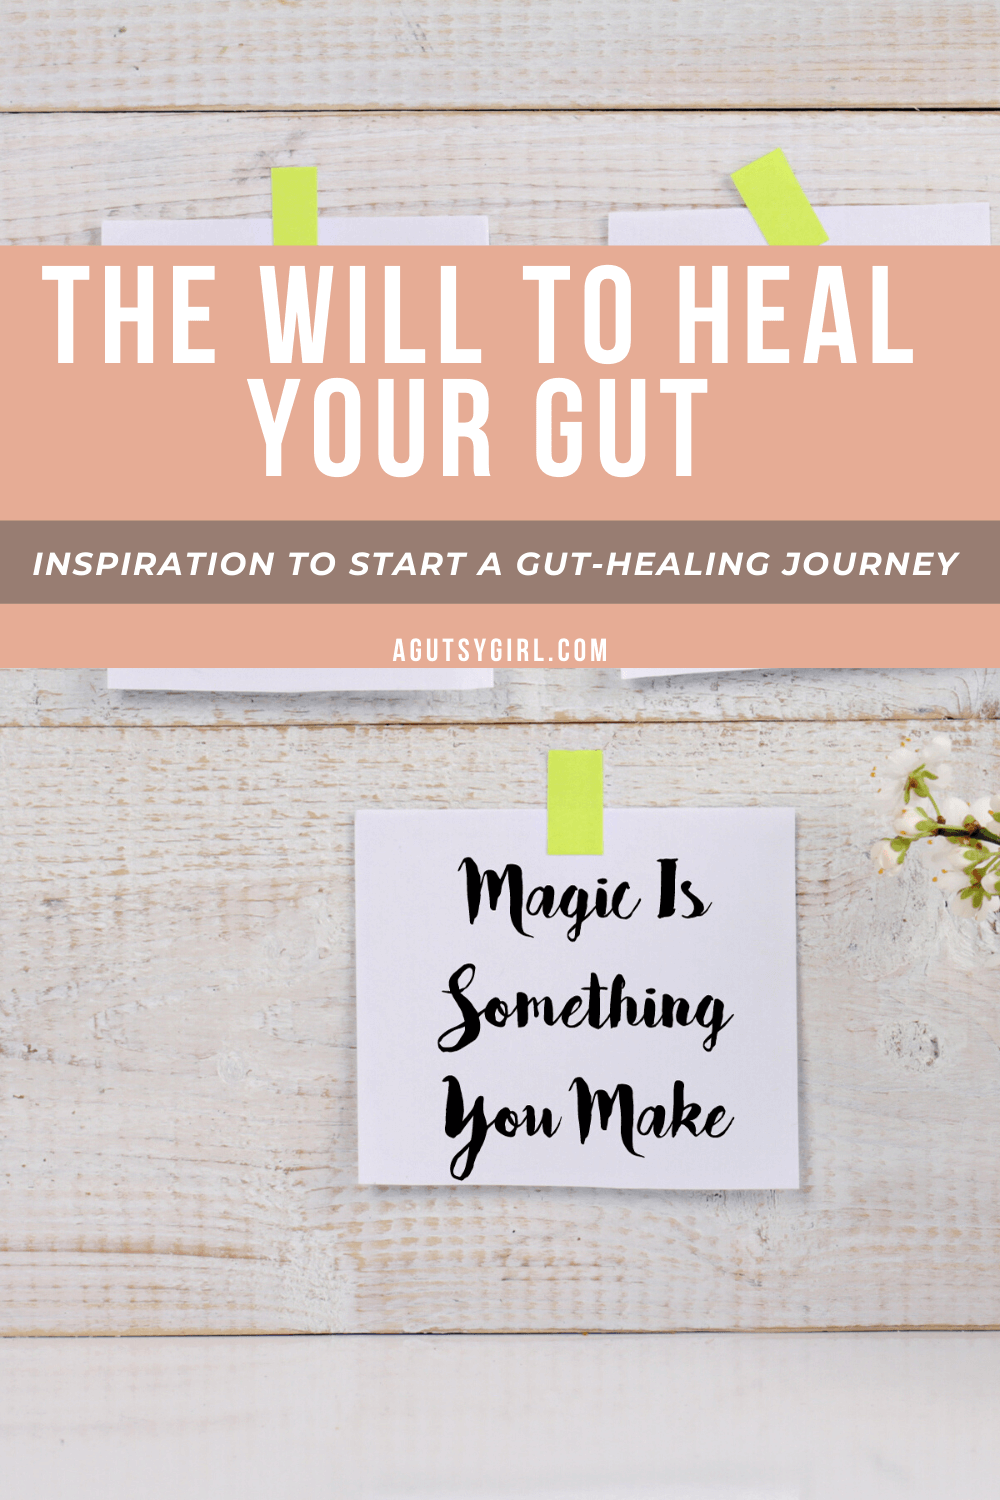 The Will to Heal Your Gut agutsygirl.com #inspiration #guthealth #gut